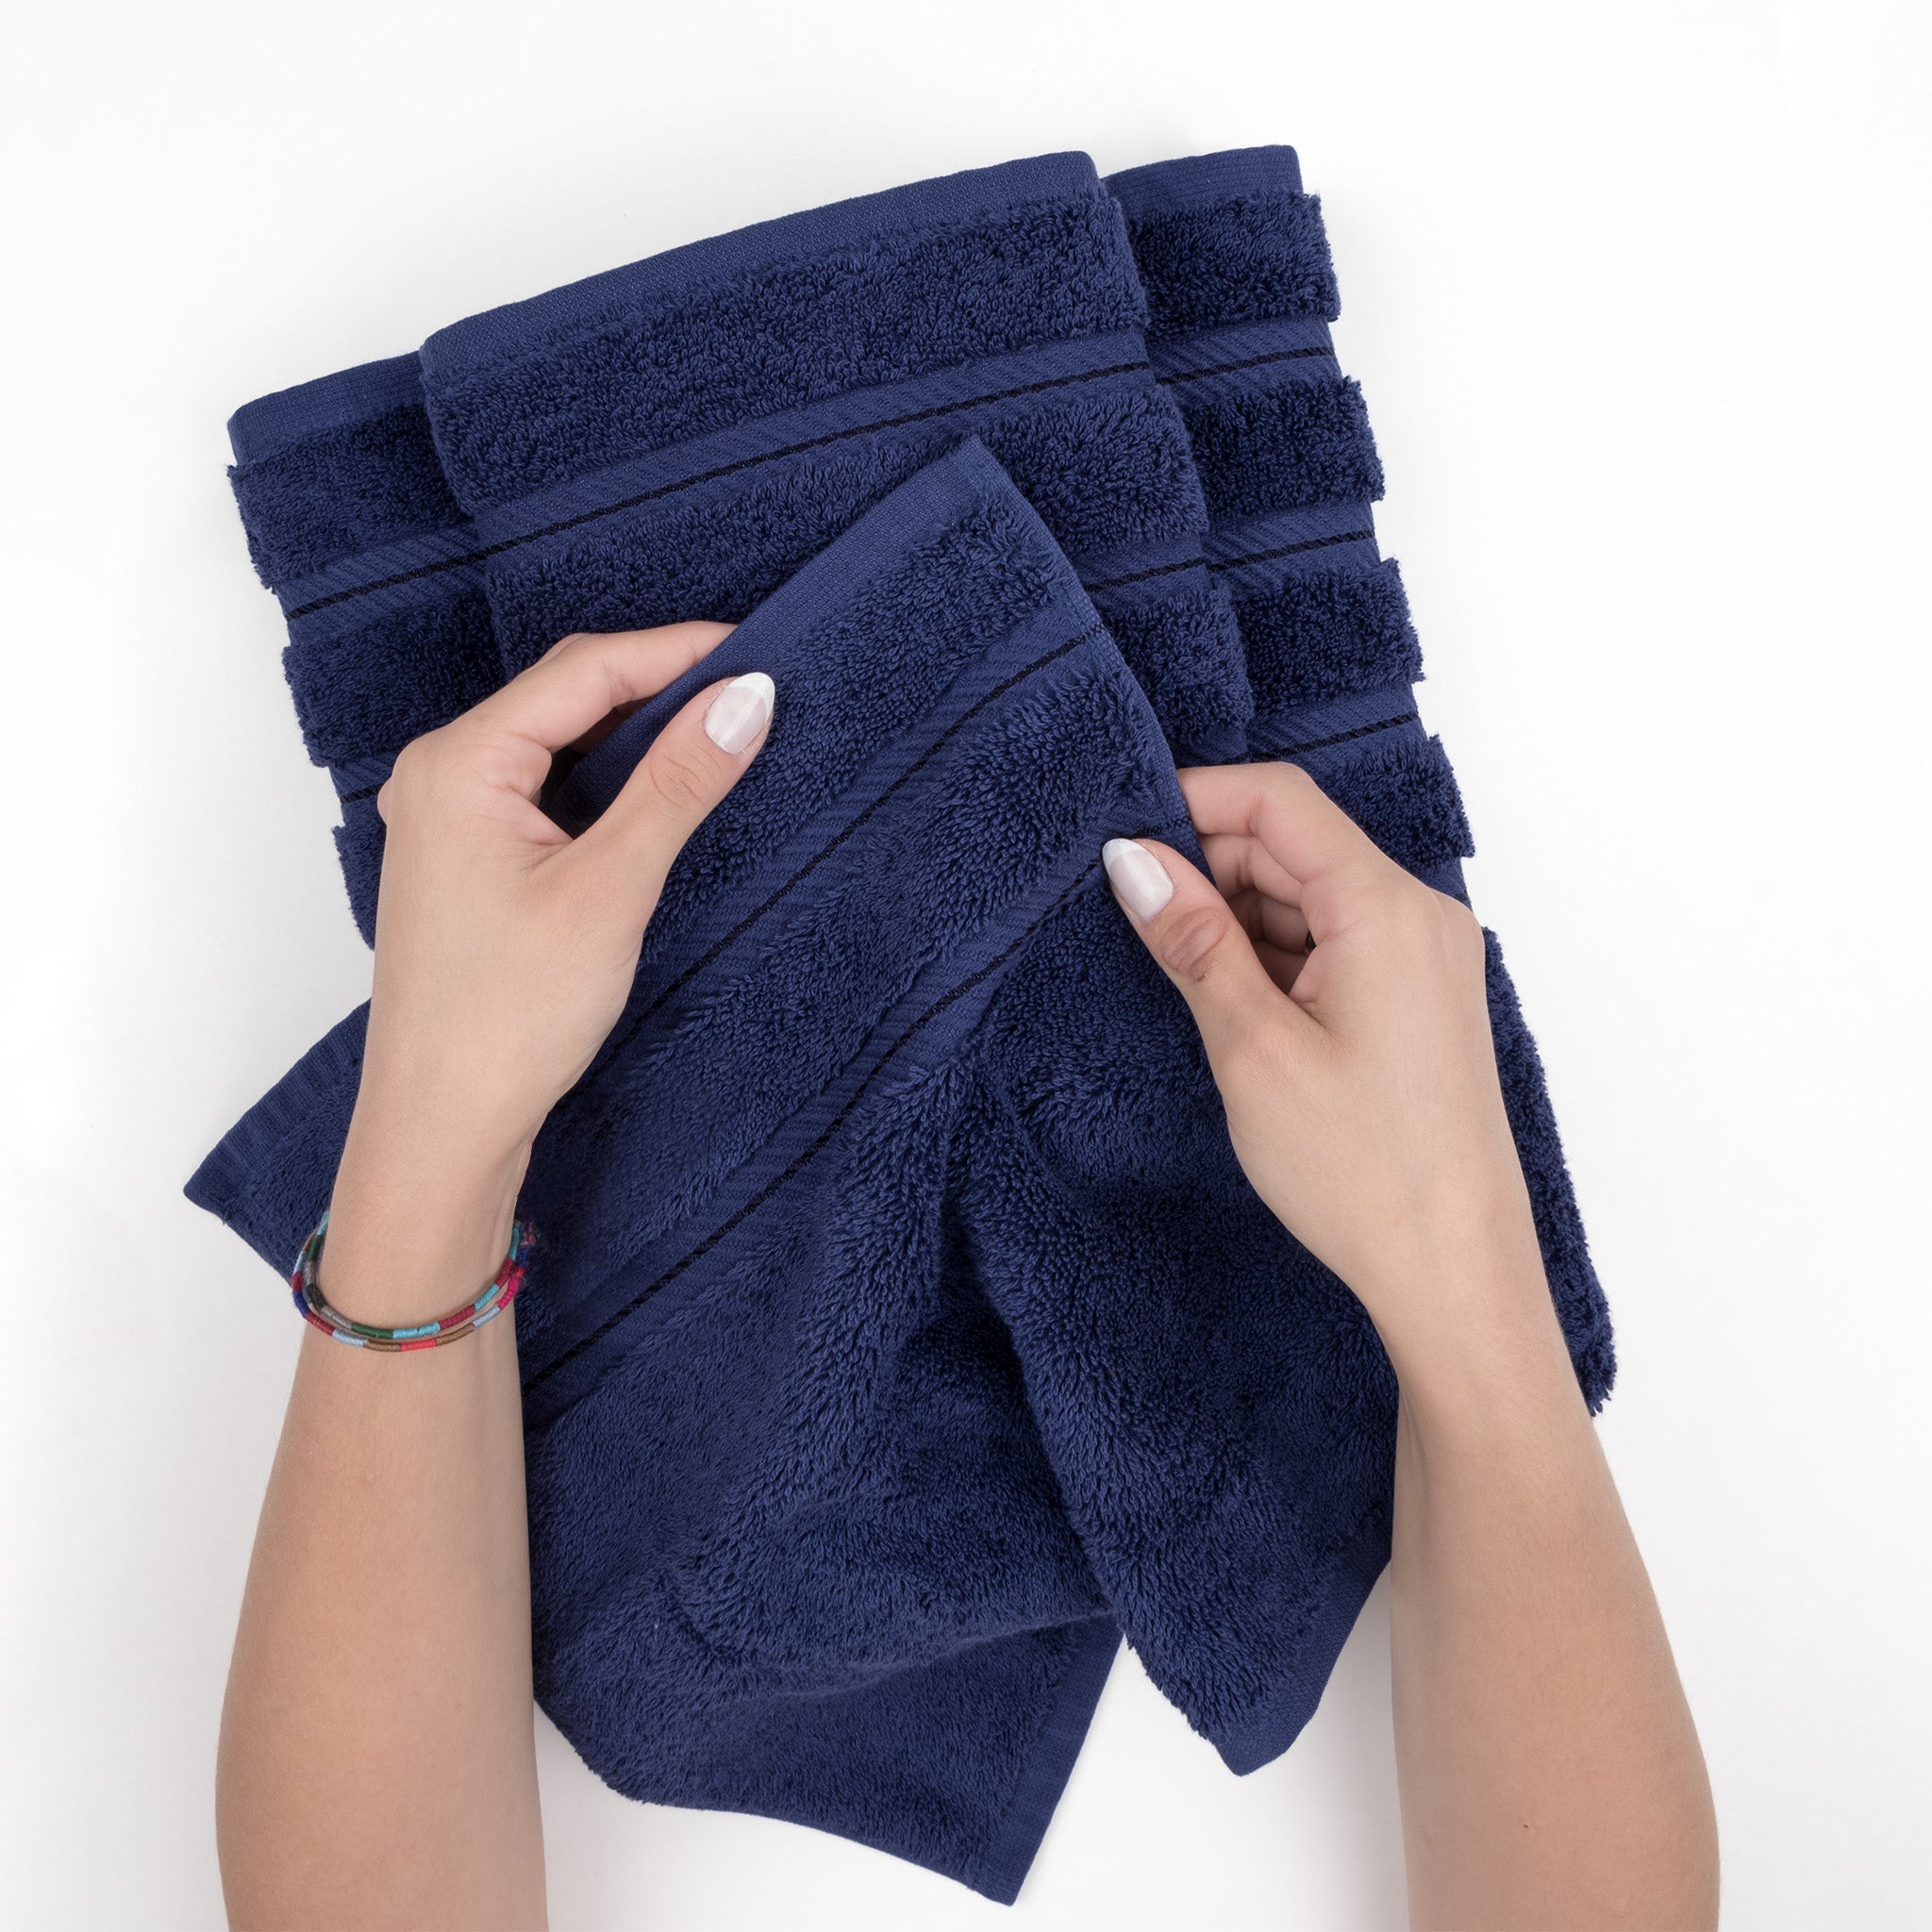 MAGGEA 4 Piece Oversized Bath Sheet Towels (35 x 70 in,Navy Blue) 700 GSM Ultra Soft Bath Towel Set Thick Large Cozy Plush Highl